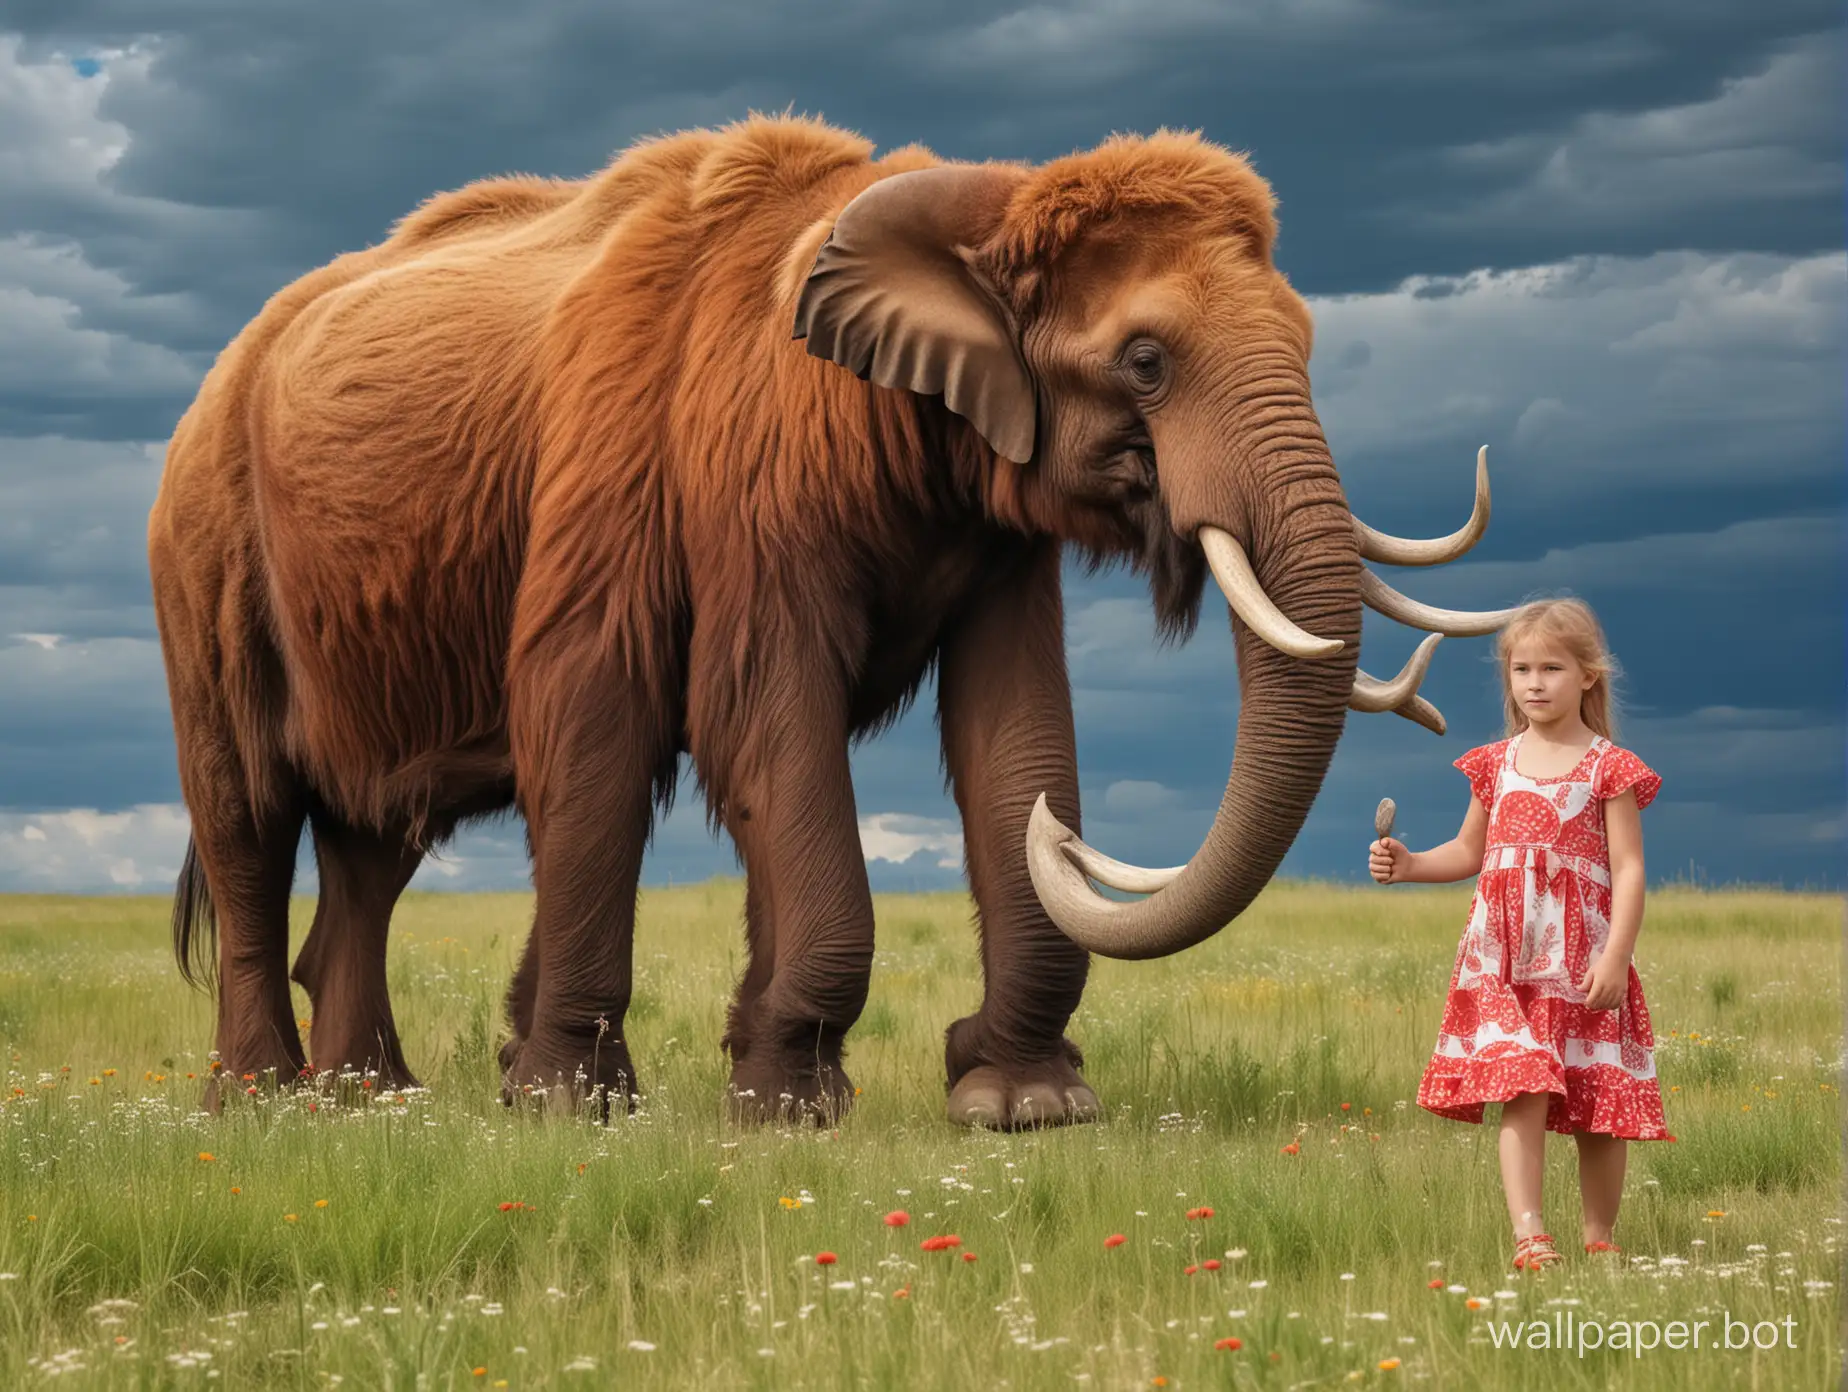 mother and daughter in full growth barbarians in a blooming steppe under the summer sky, with a red mammoth in the background